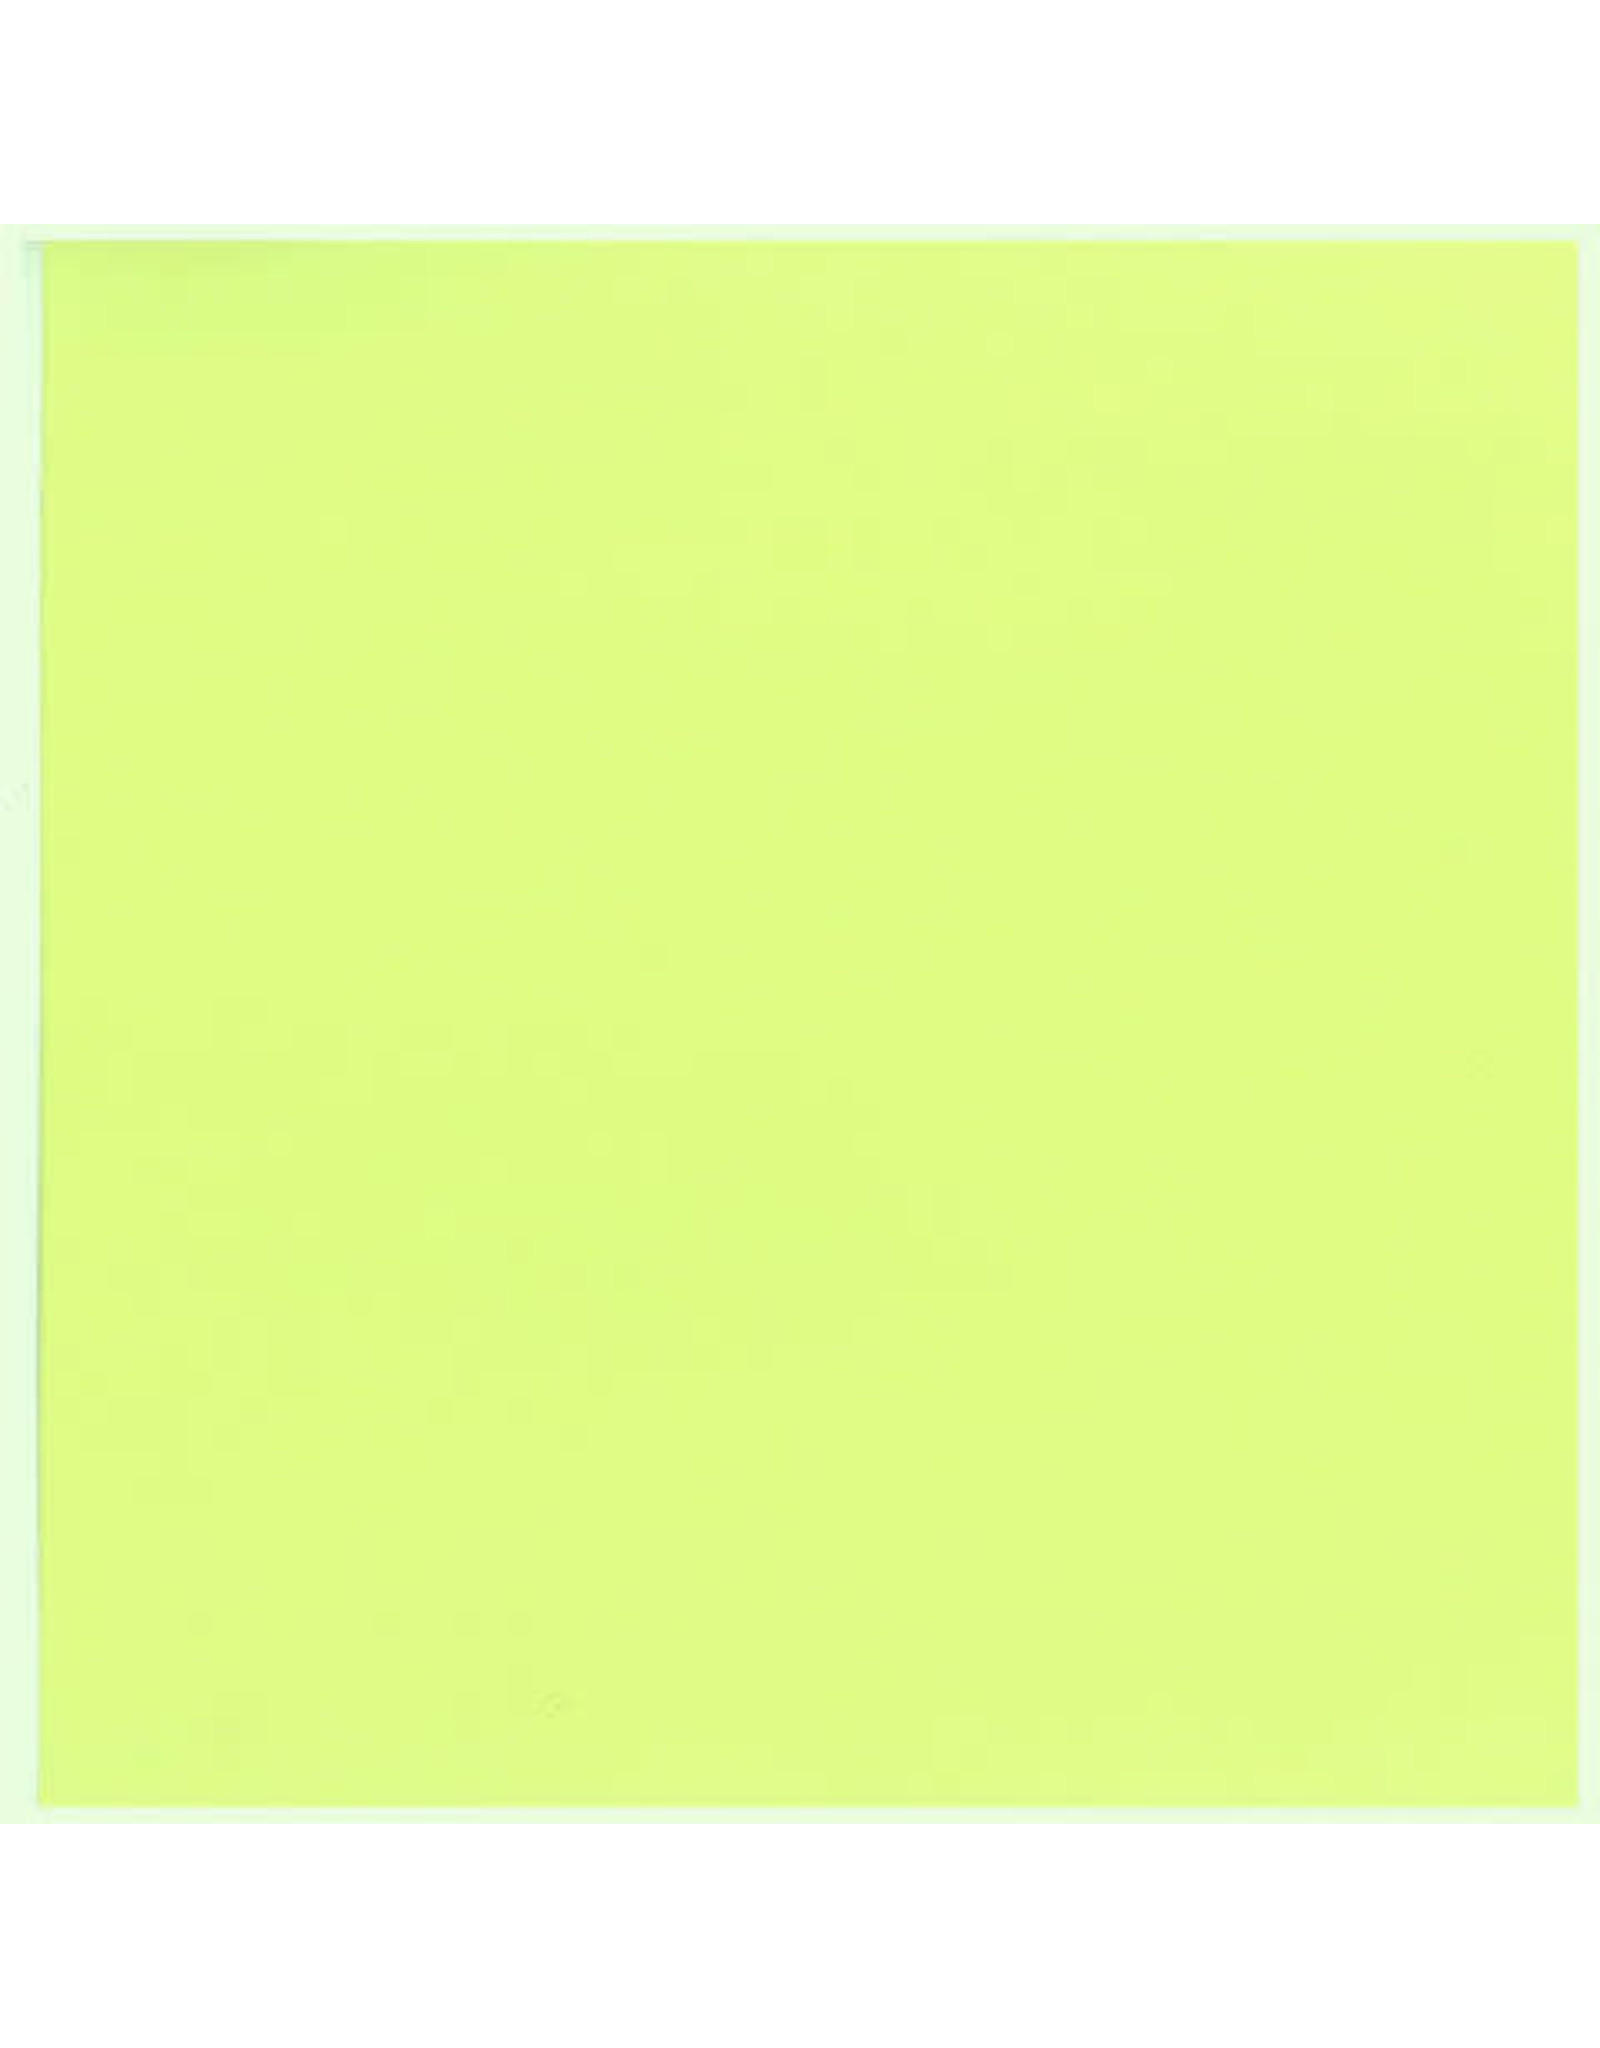 My Colors 8.5x11 Key Lime Classic Cardstock